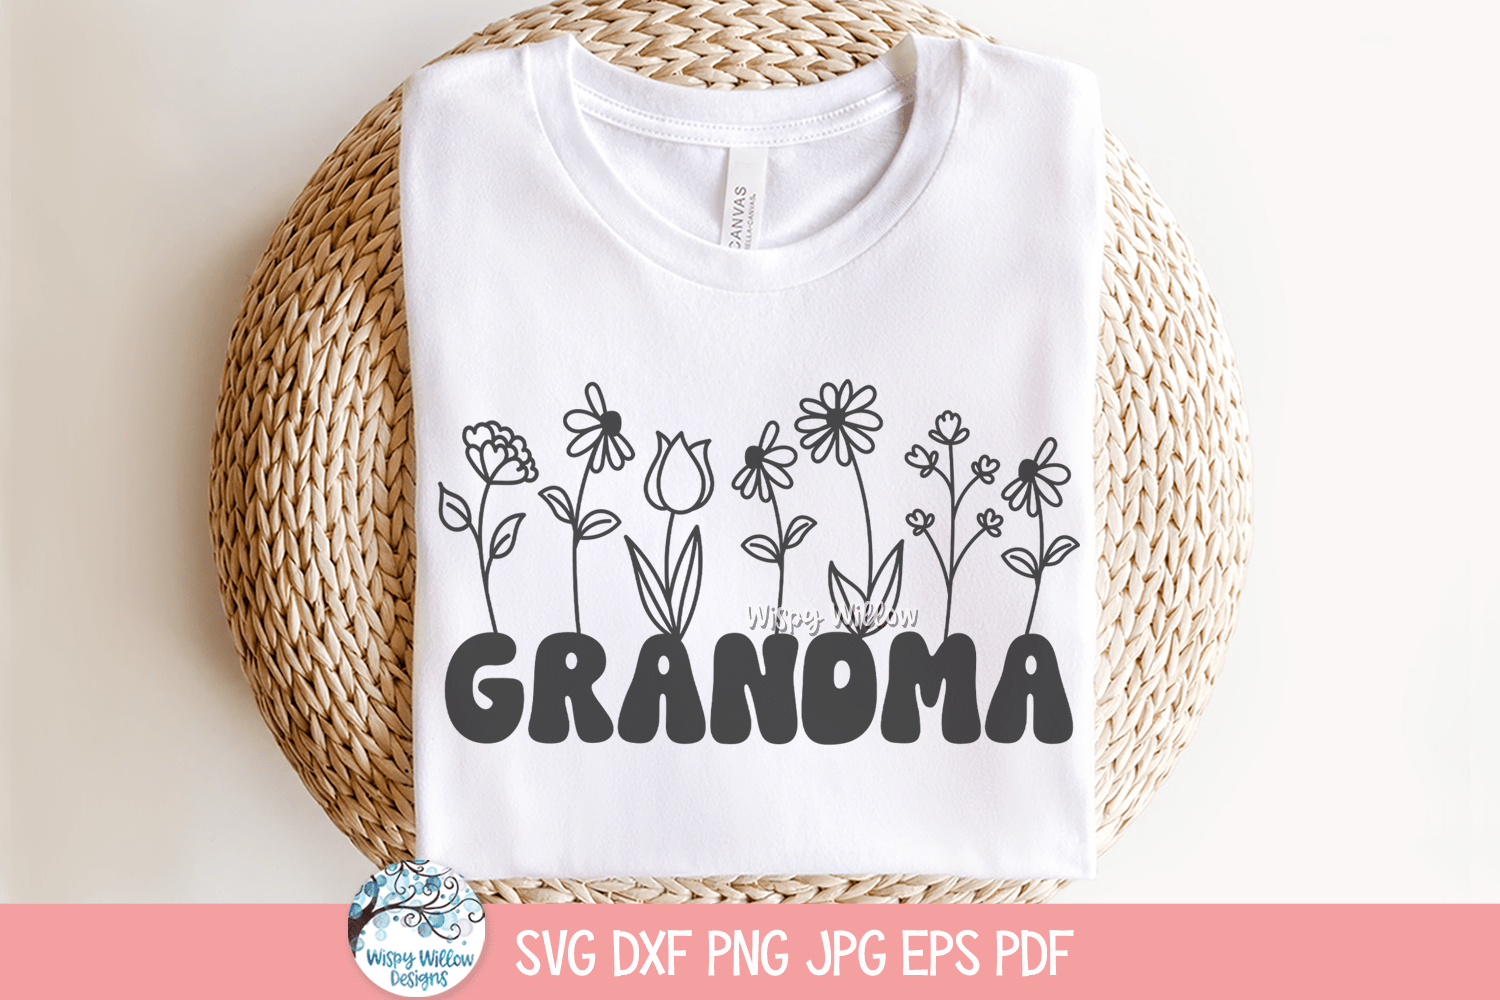 Floral Grandma SVG | Sweet Grandmother's Day Gift Design Wispy Willow Designs Company